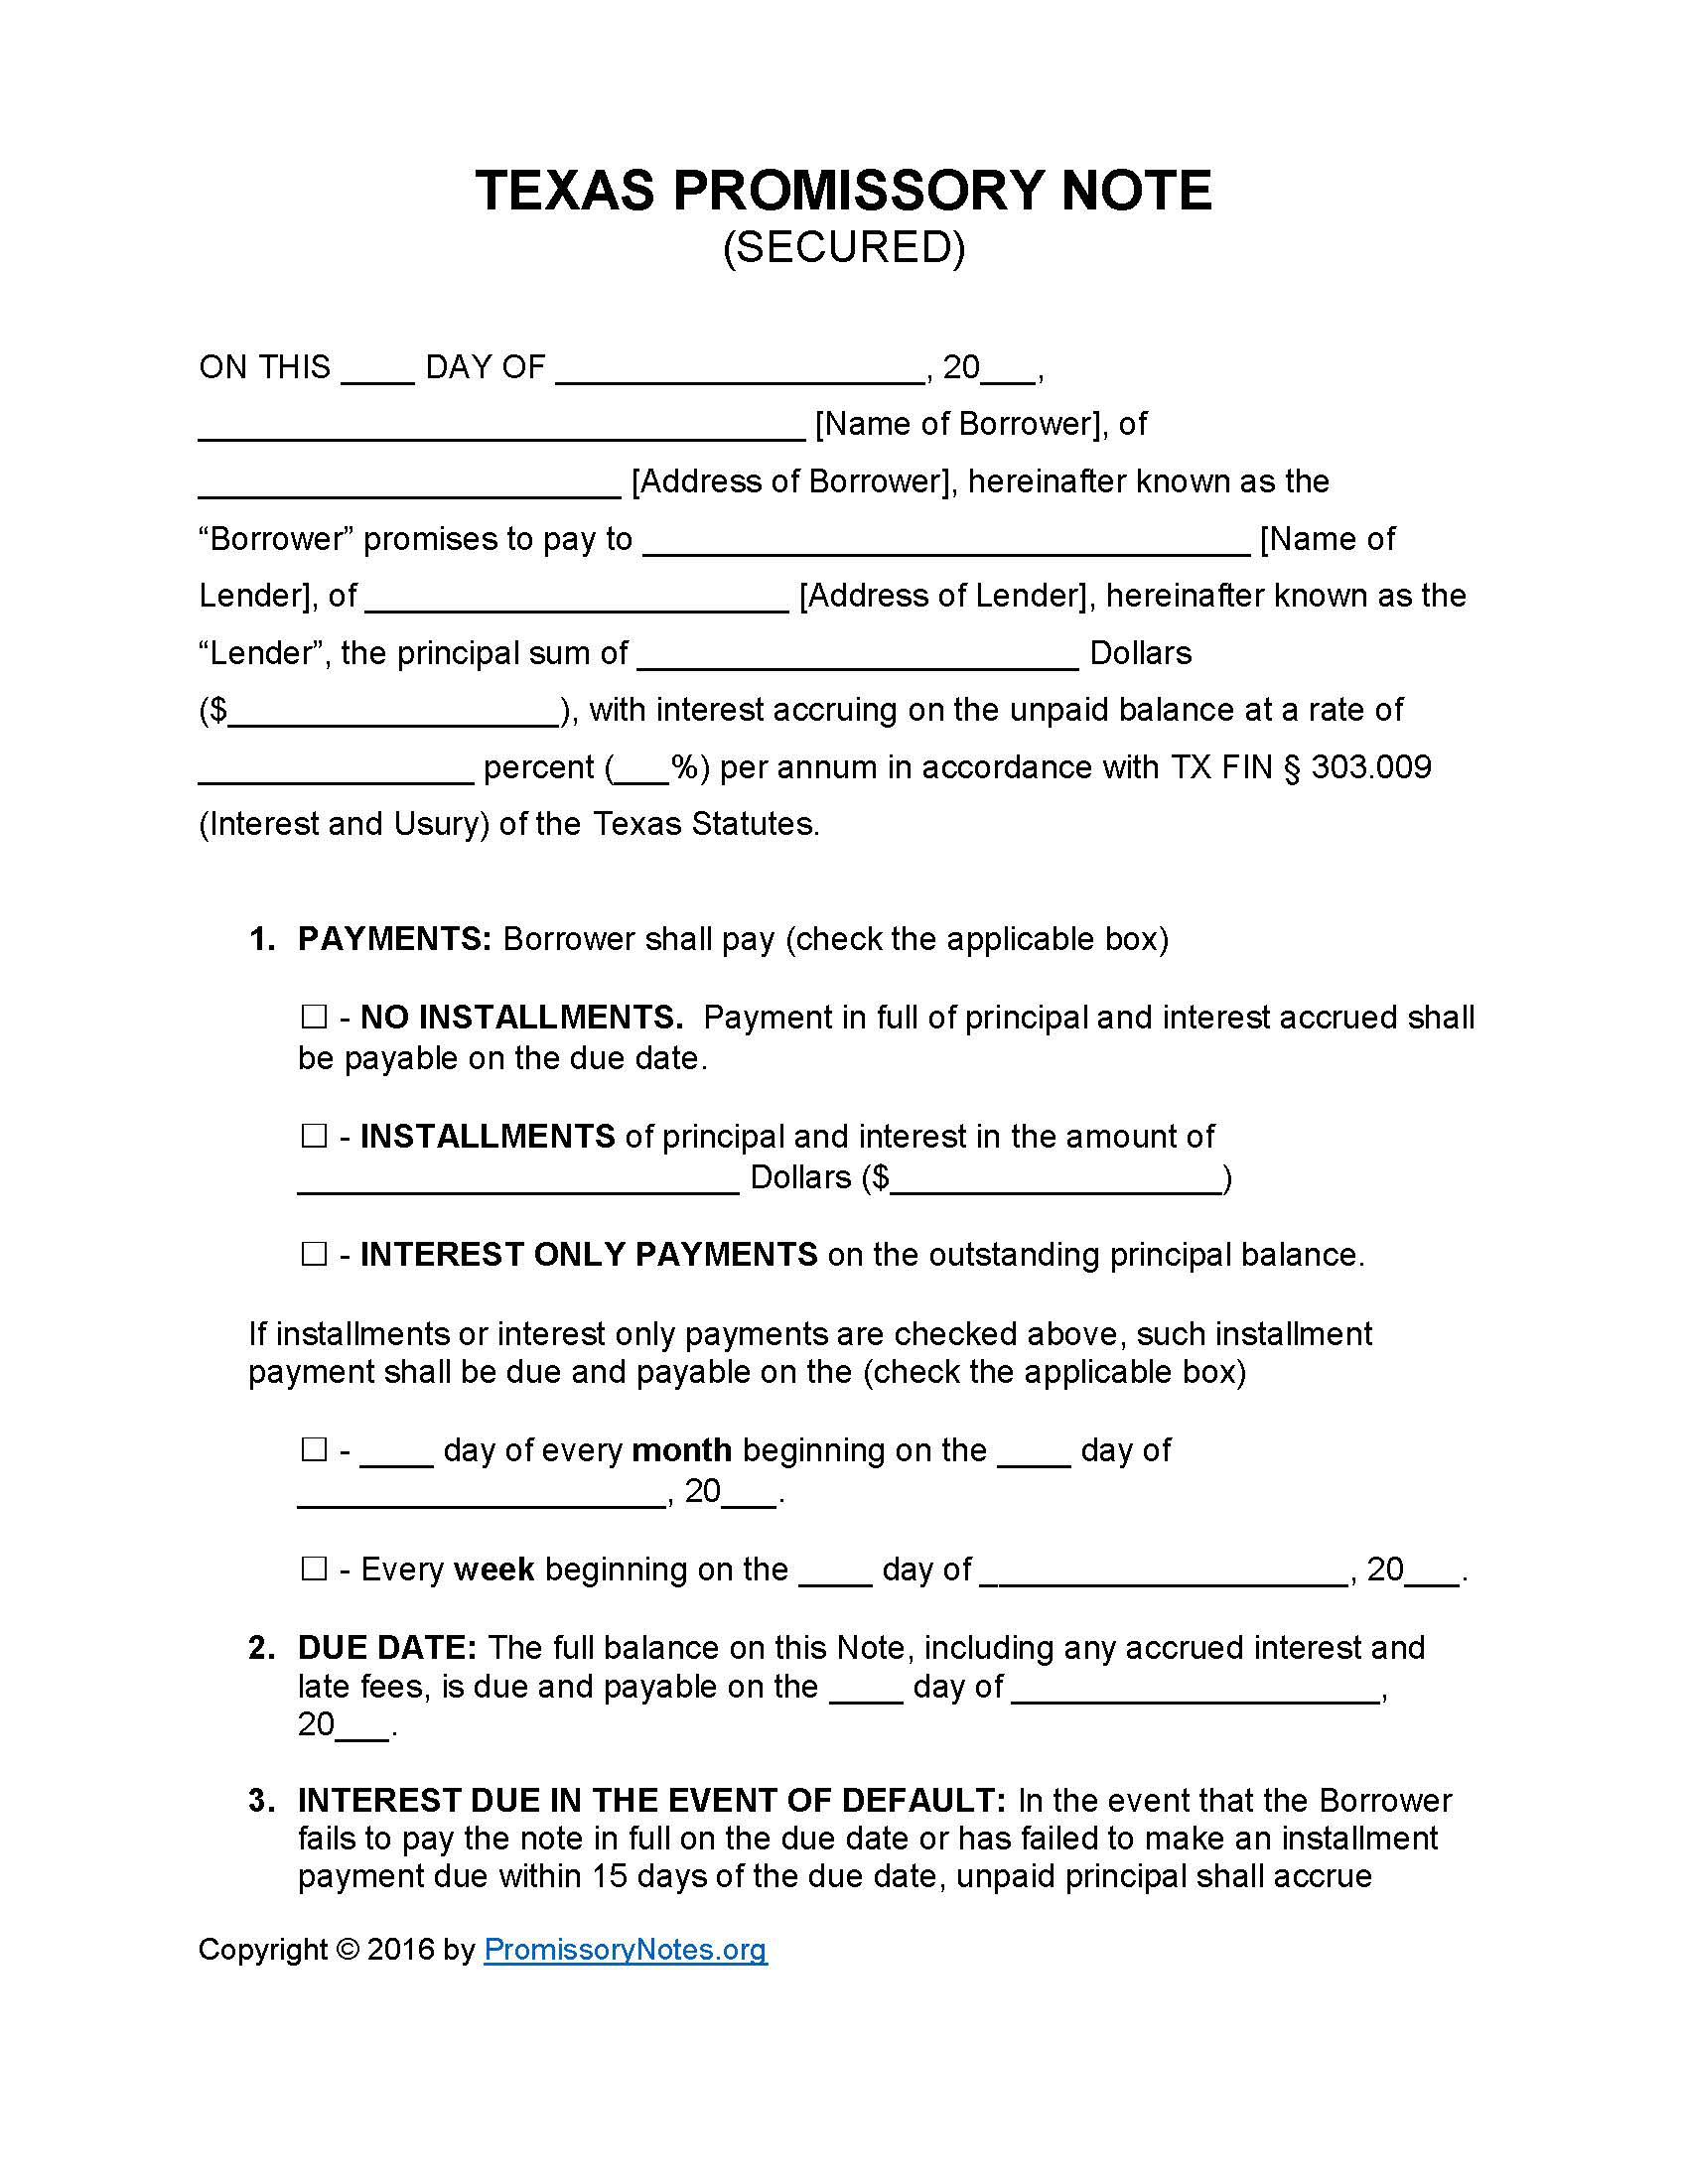 texas-secured-promissory-note-form